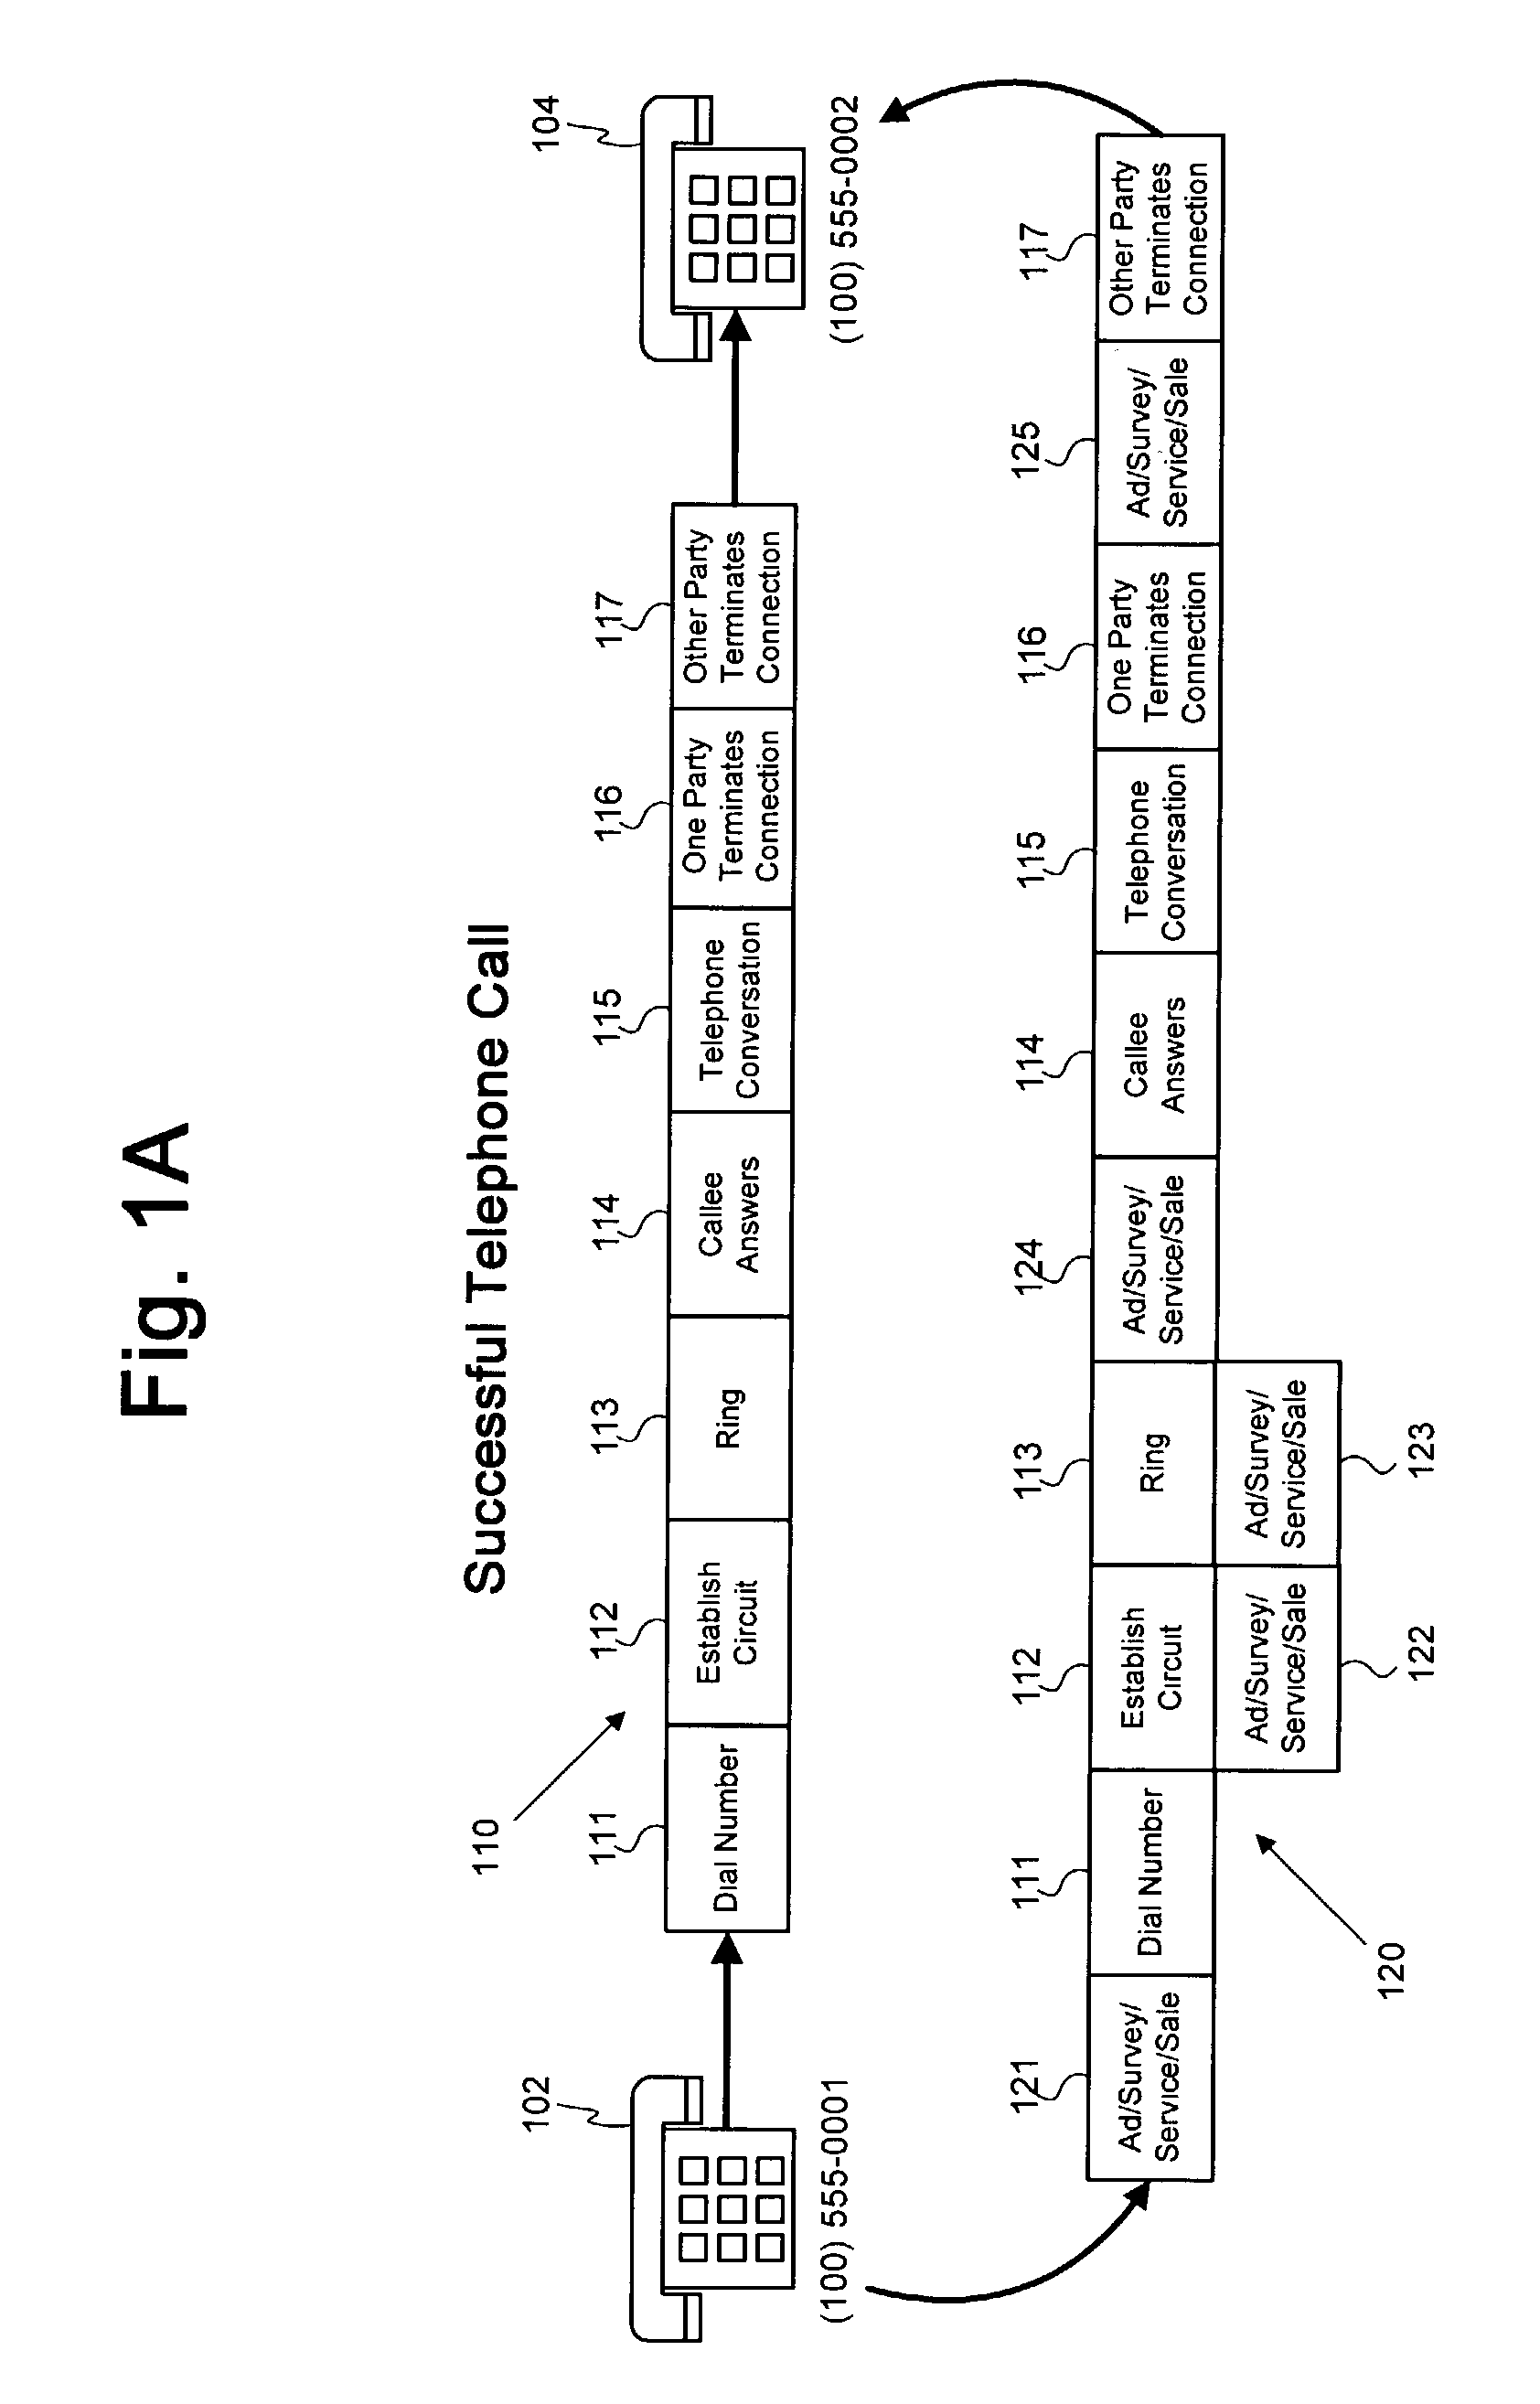 Method and system for providing advertising to telephone callers